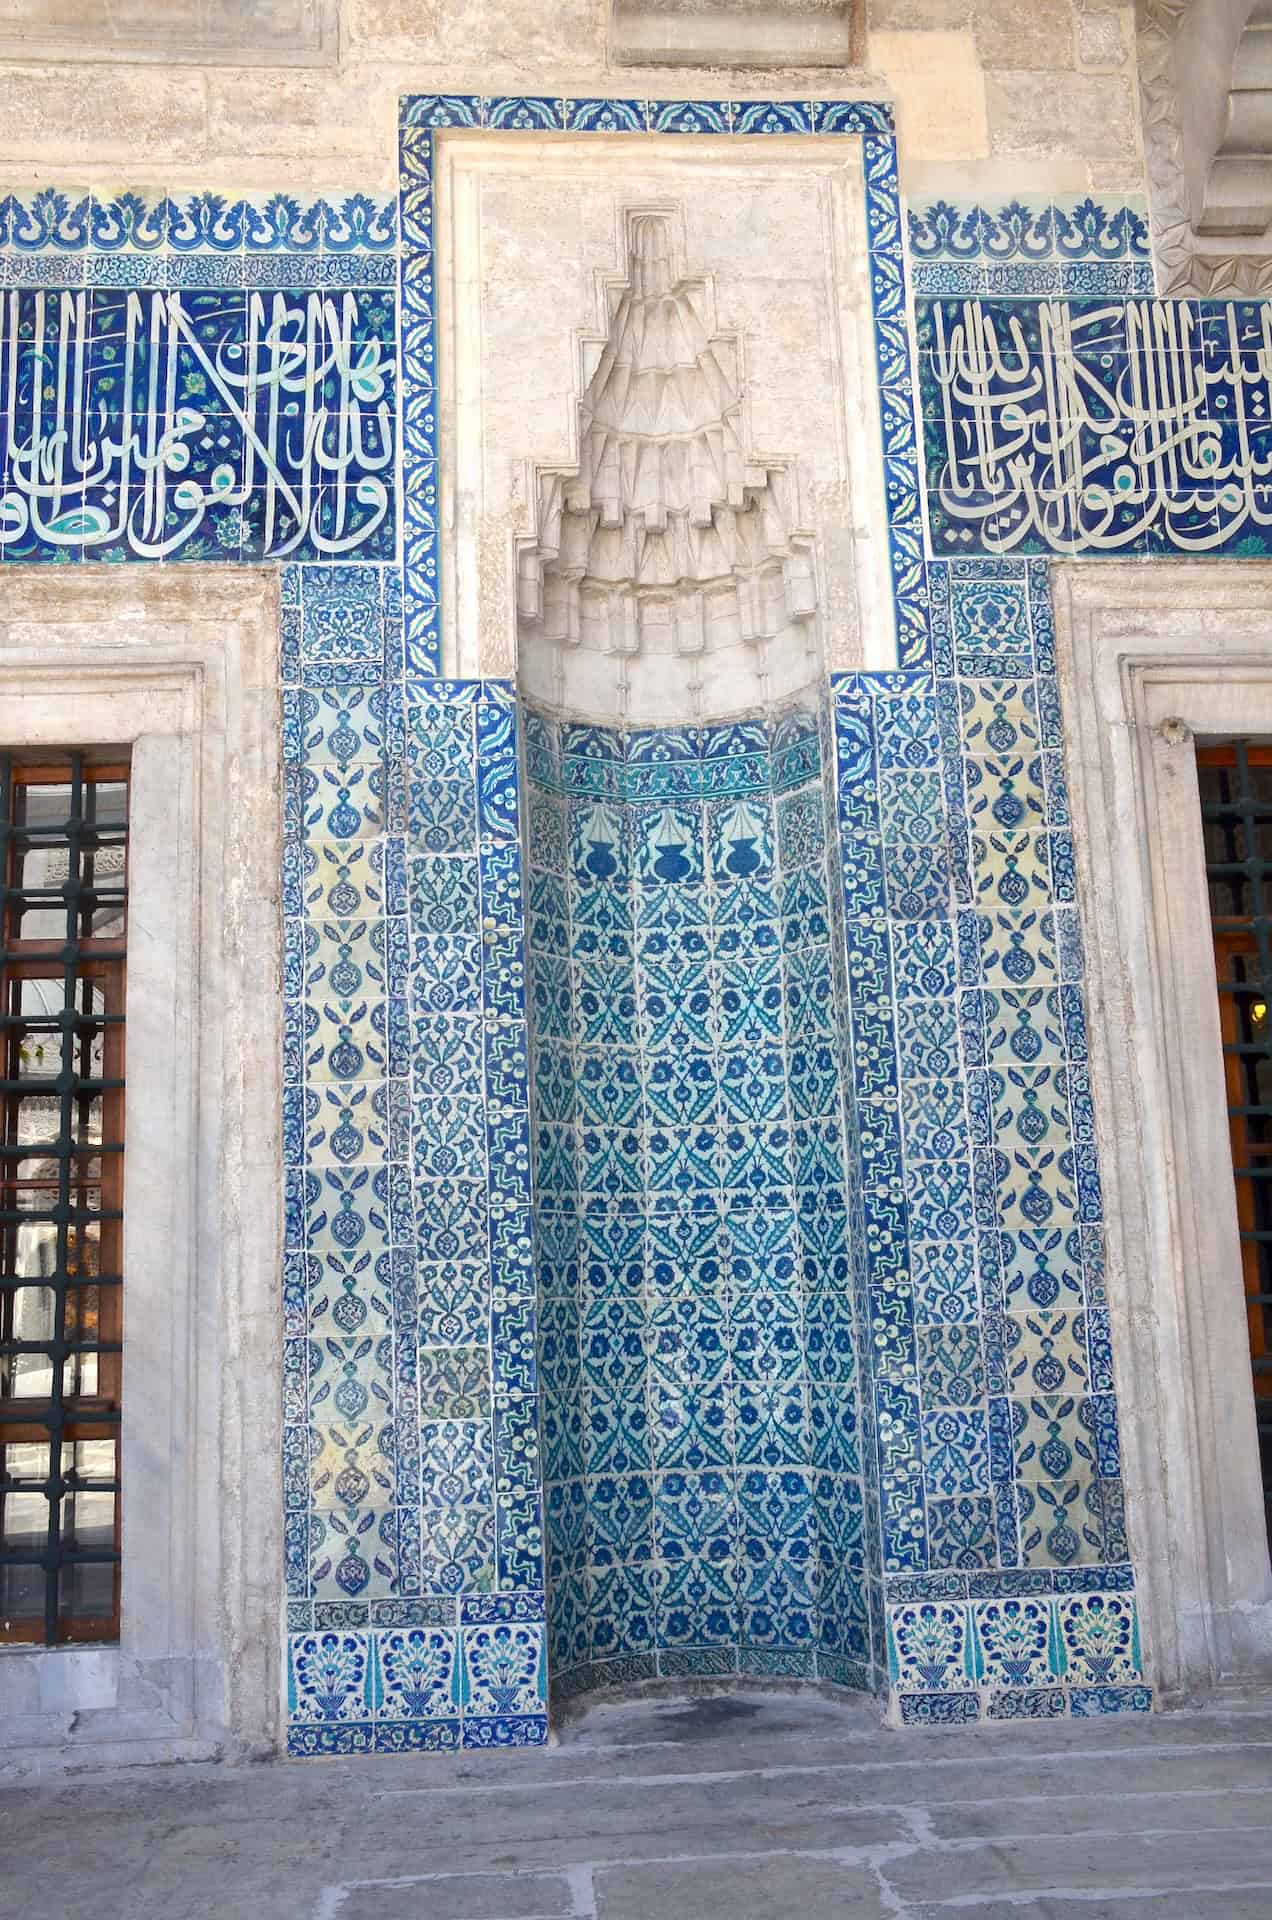 Iznik tiles in the courtyard of the New Mosque in Istanbul, Turkey